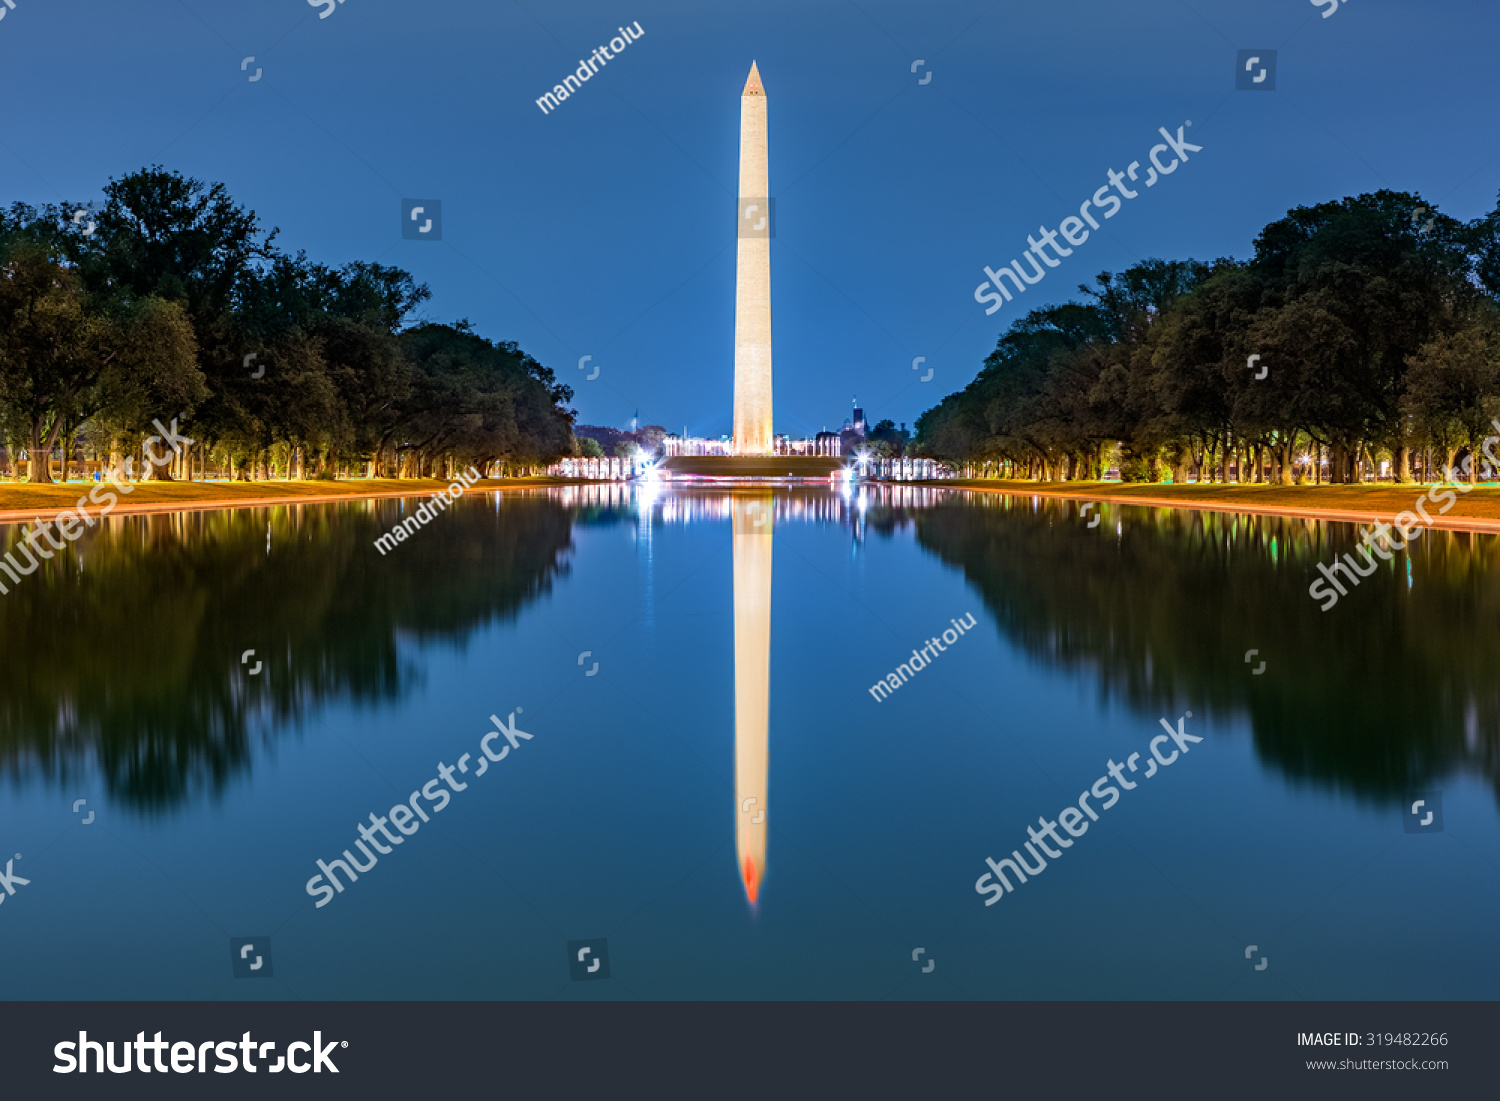 Washington monument, mirrored in the reflecting pool #319482266